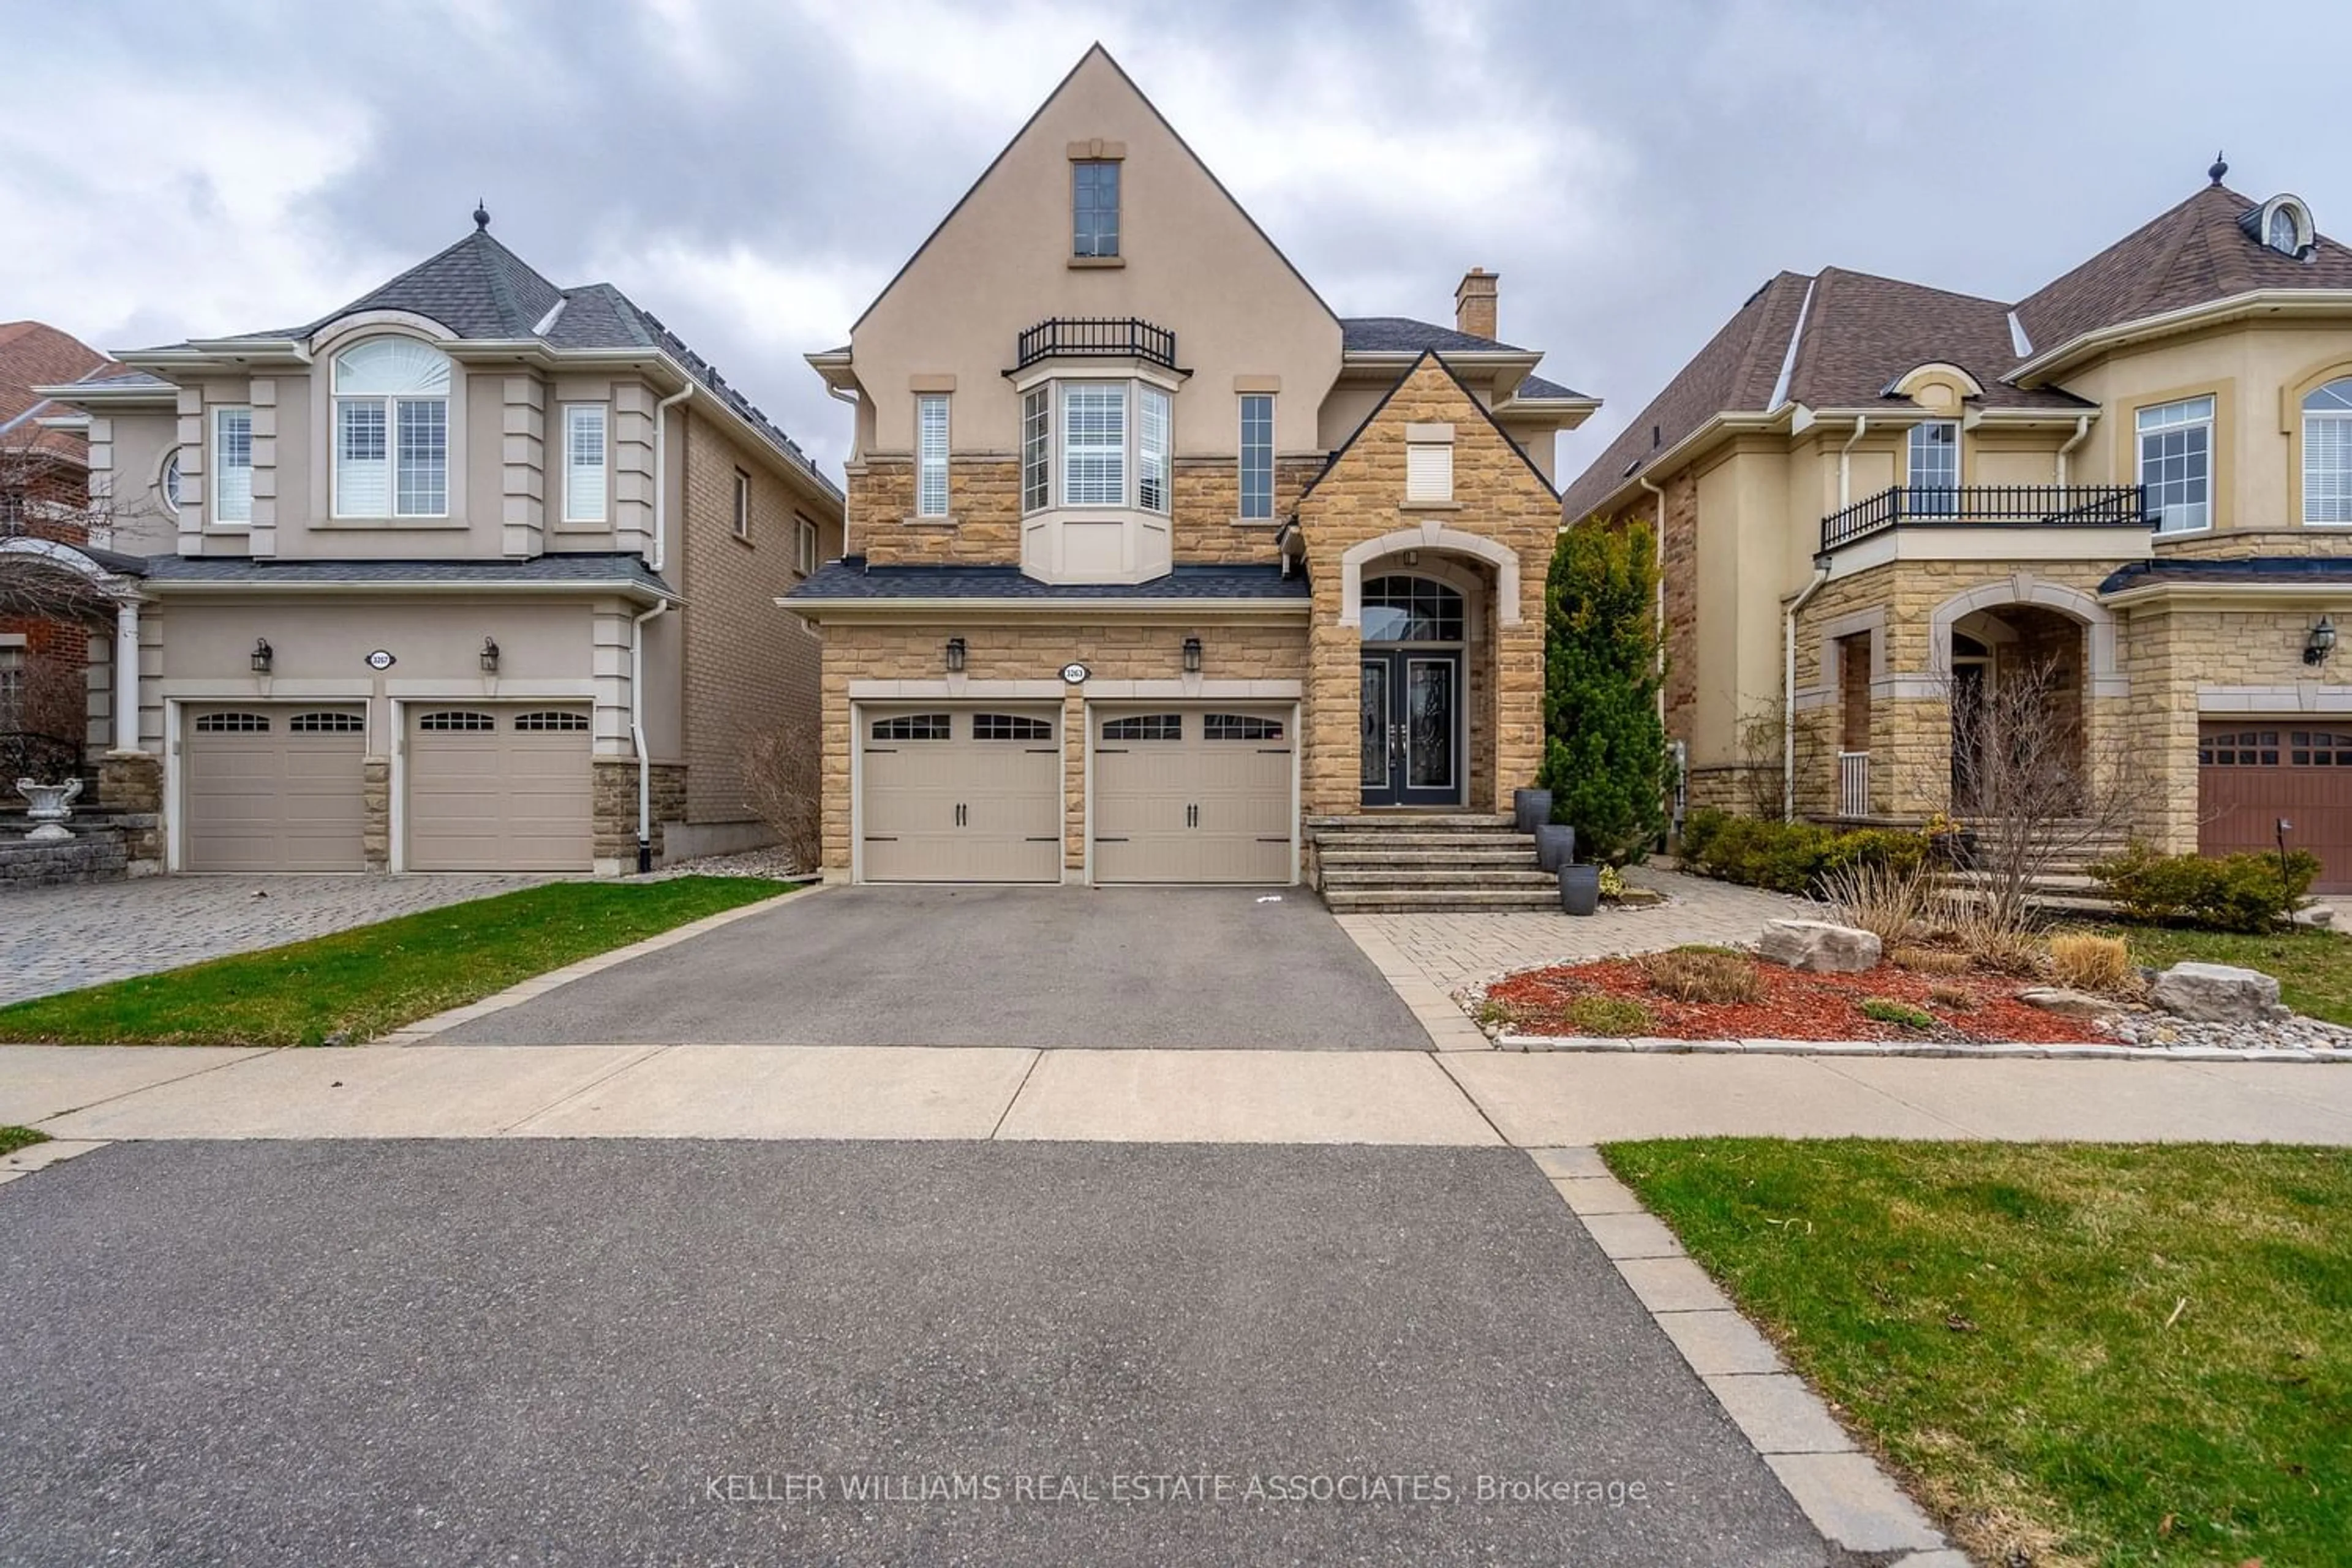 Home with brick exterior material for 3263 Pringle Pl, Mississauga Ontario L5M 7V7